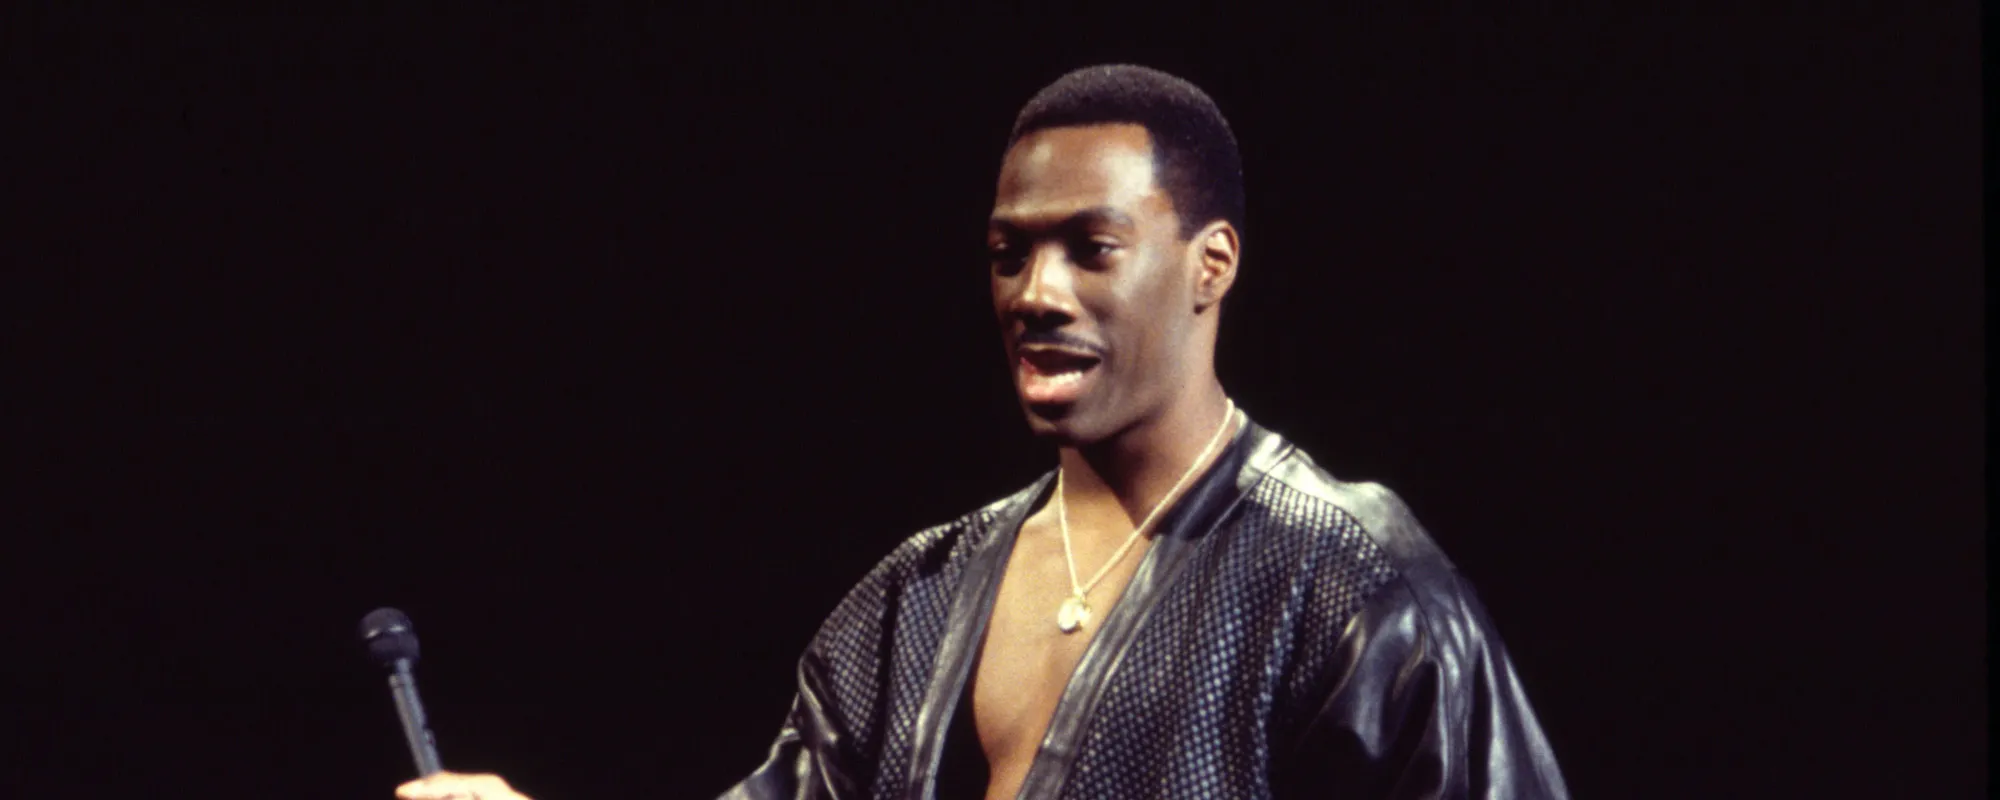 Actors You Didn’t Know Scored Hit Songs: Eddie Murphy’s “Party All the Time”